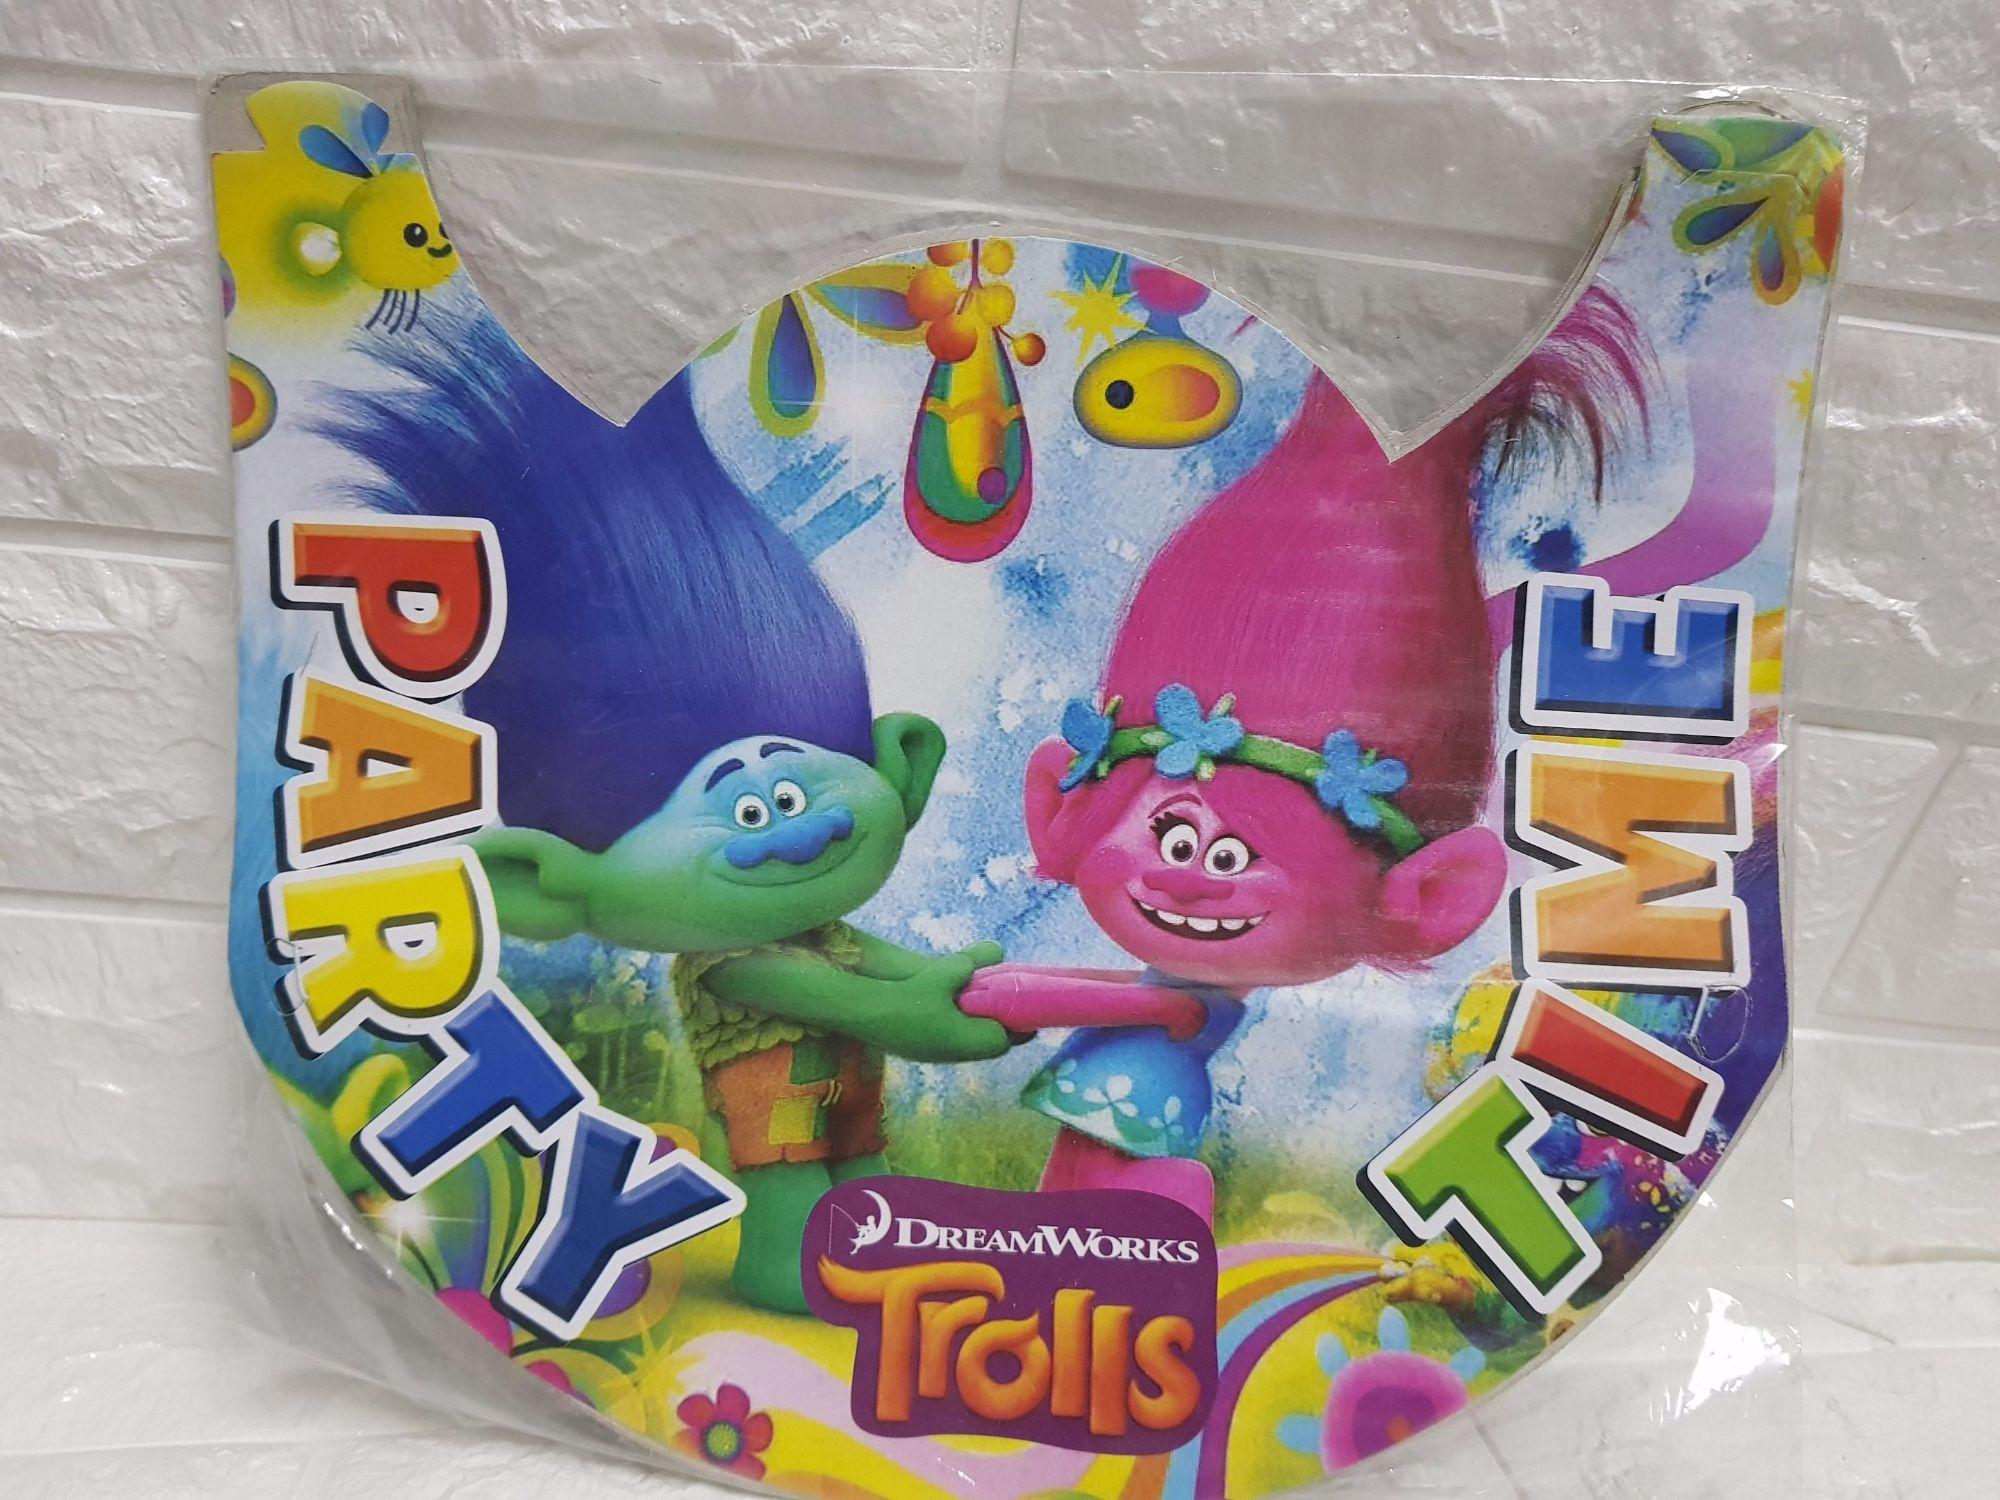 Trolls Themed Birthday Party That Is Easy To Recreate